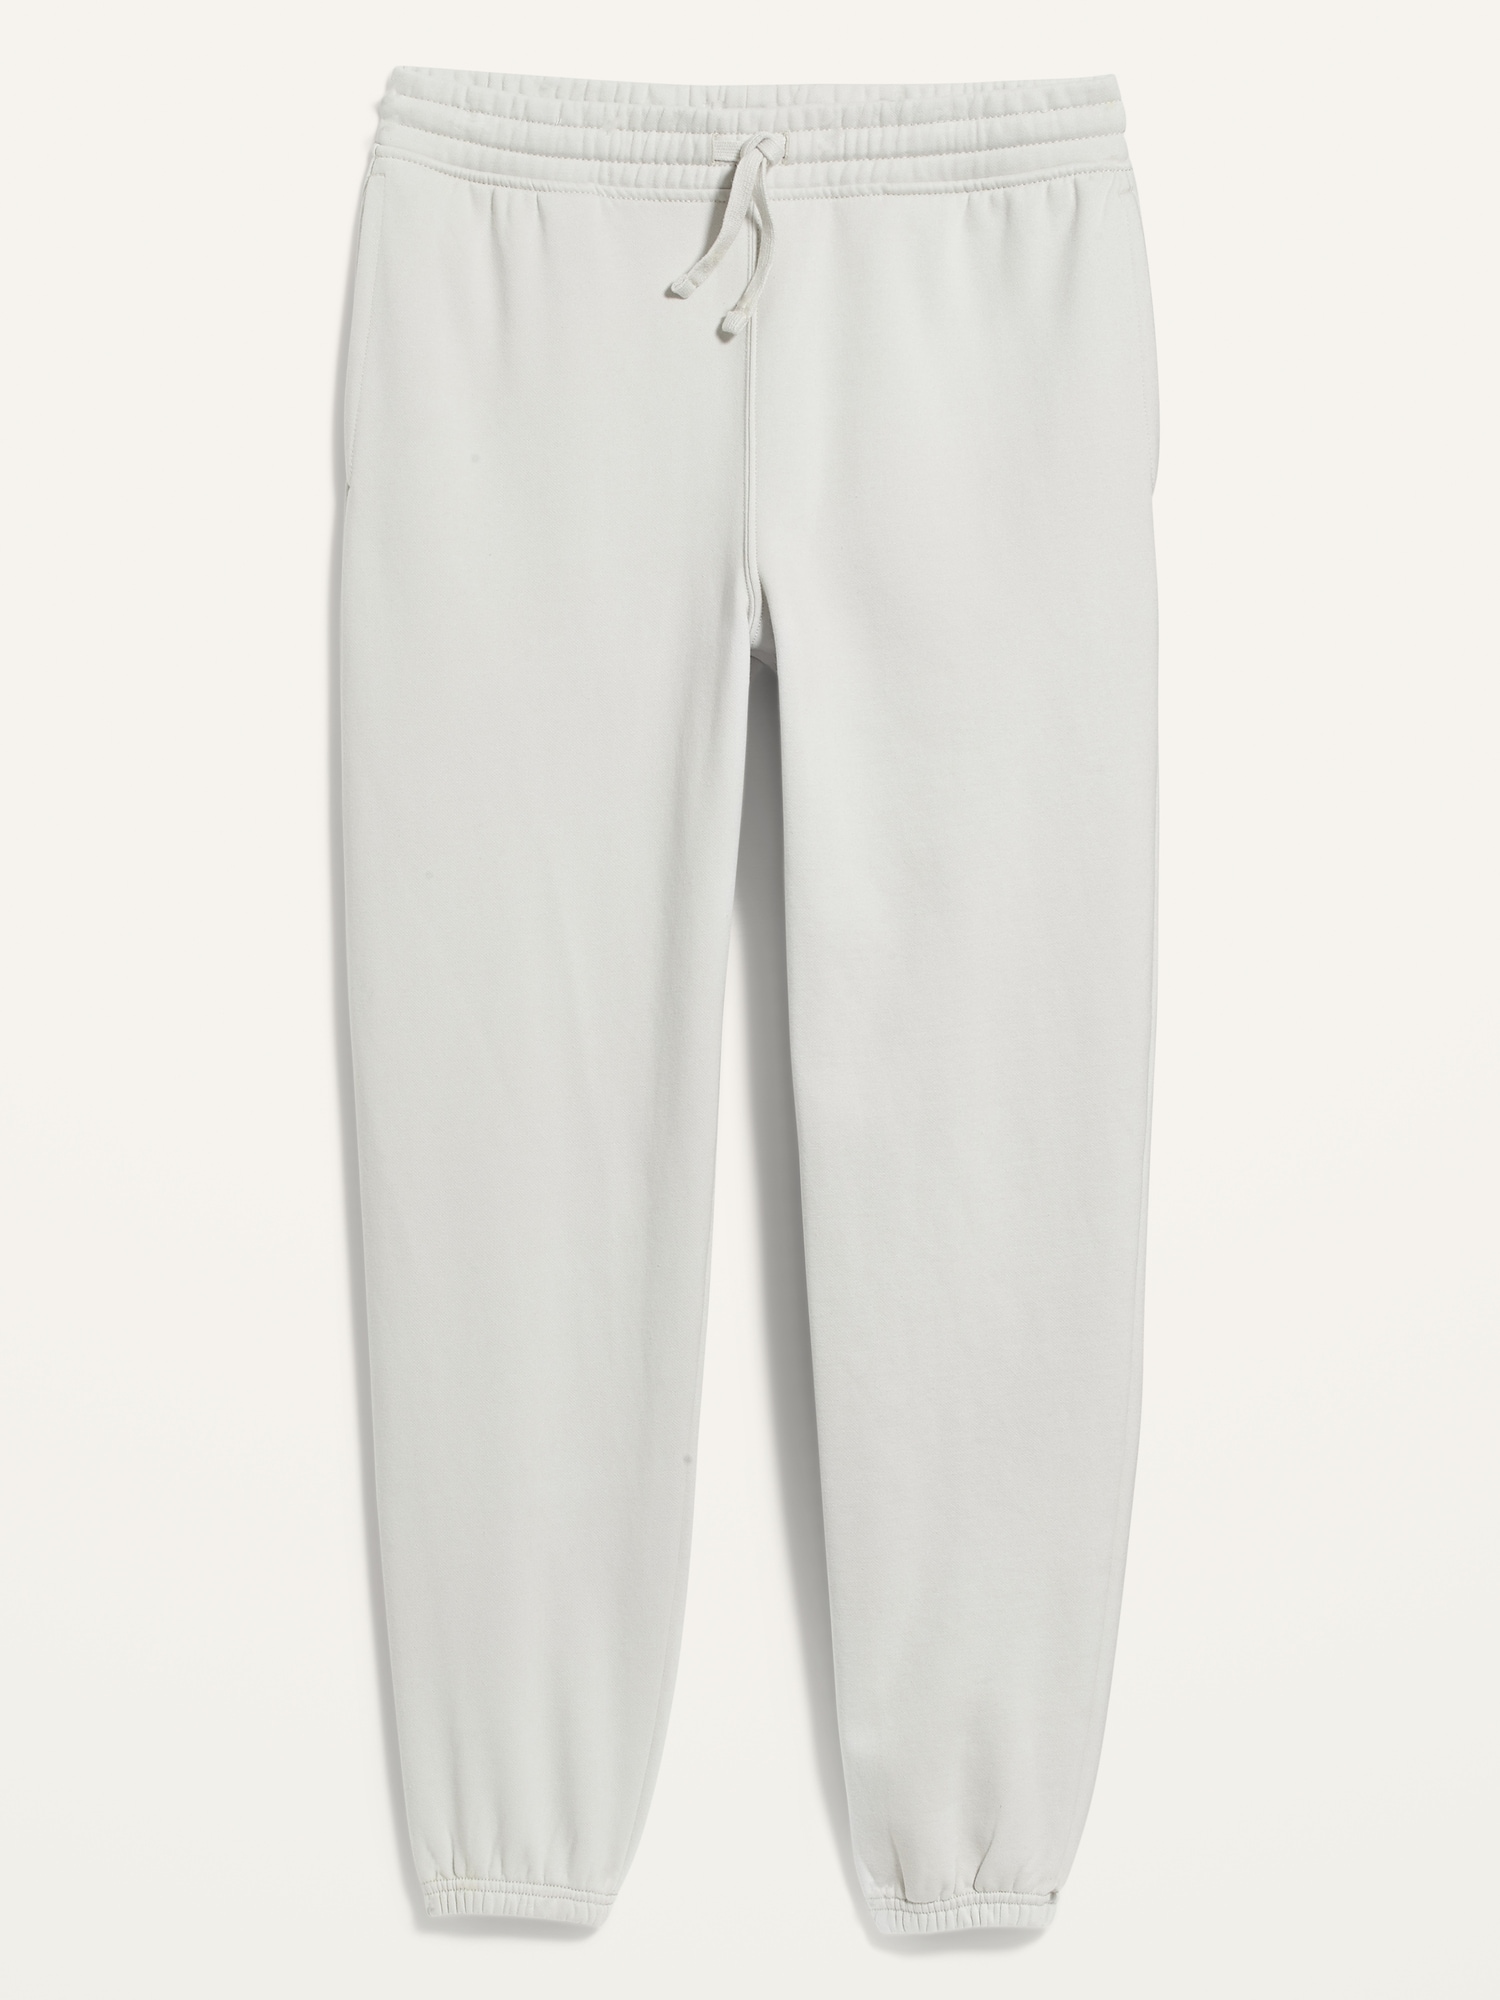 Gender-Neutral Sweatpants for Adults | Old Navy